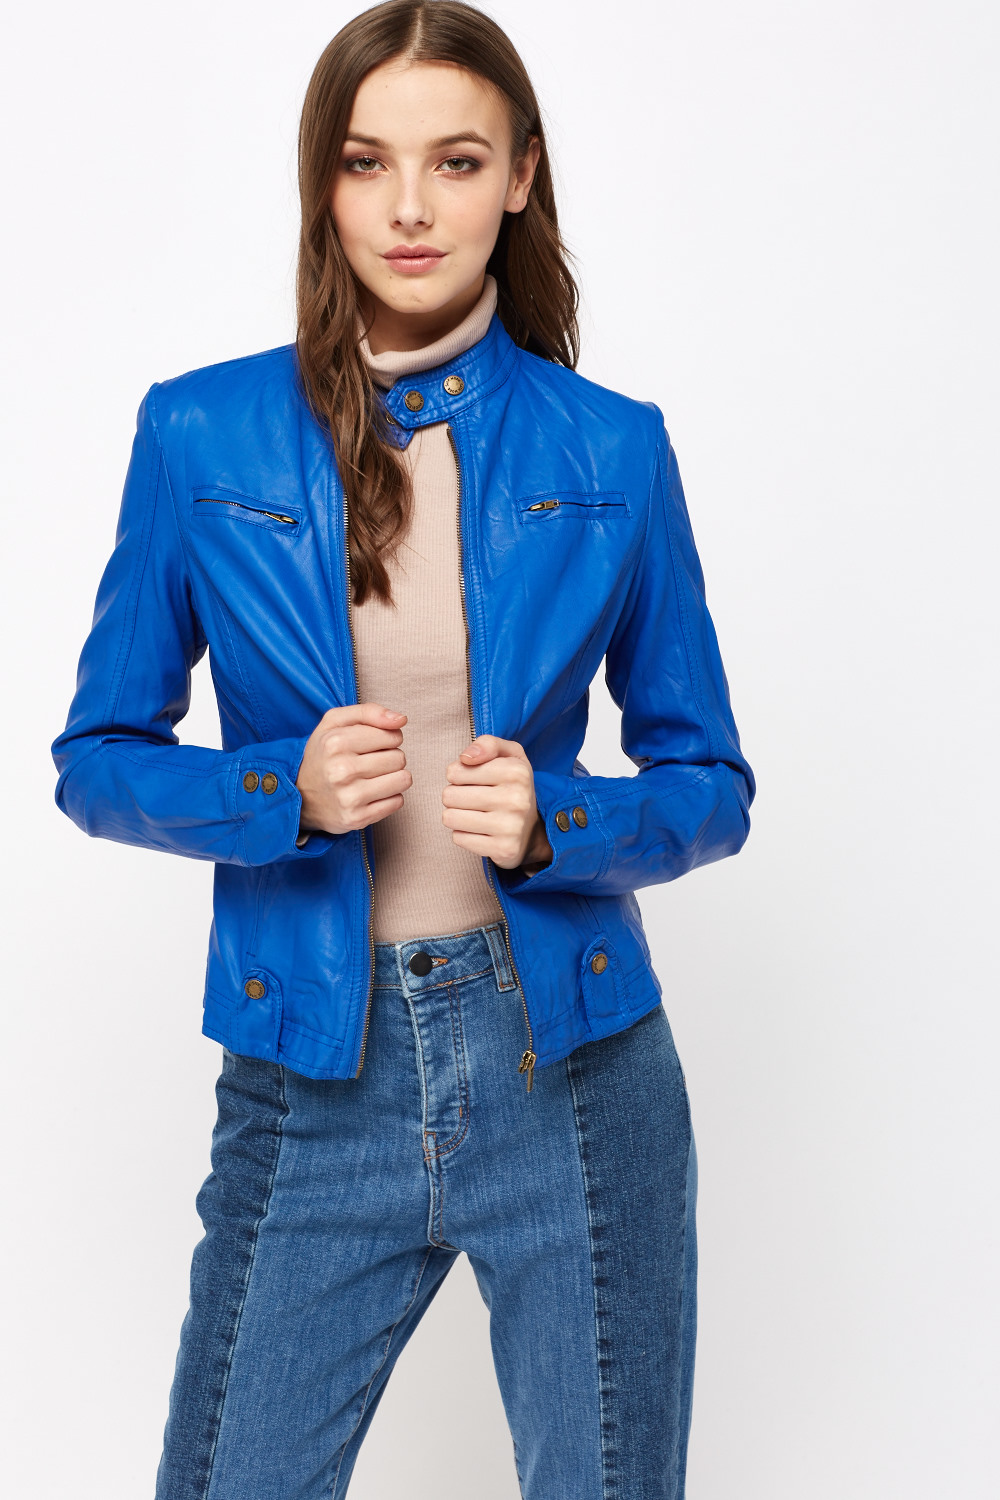 Royal Blue Faux Leather Jacket - Just $7